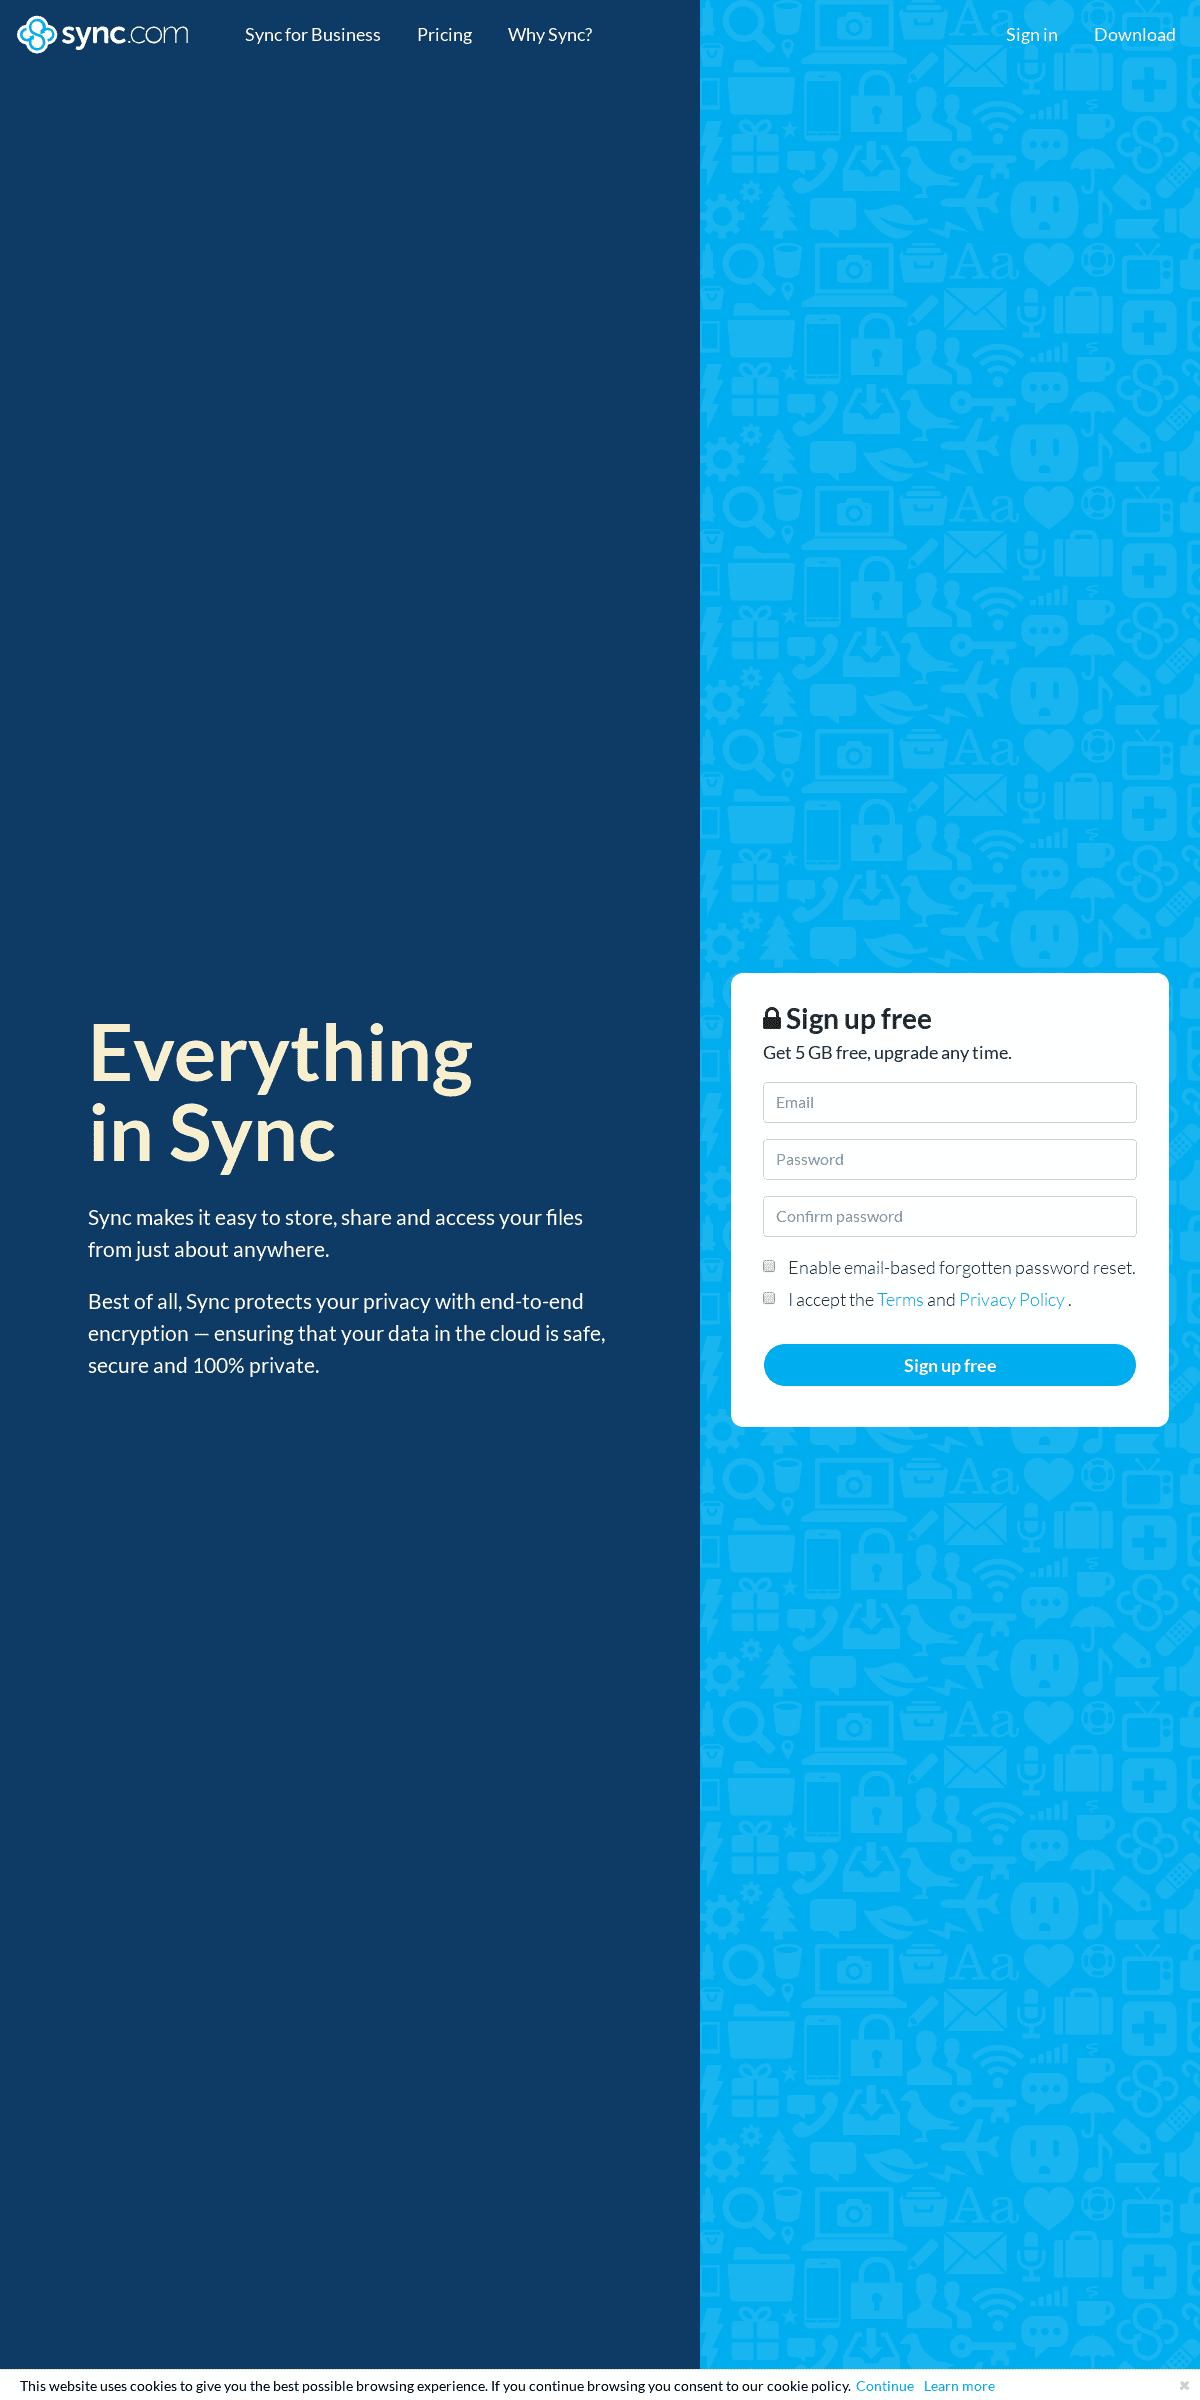 A complete backup of sync.com